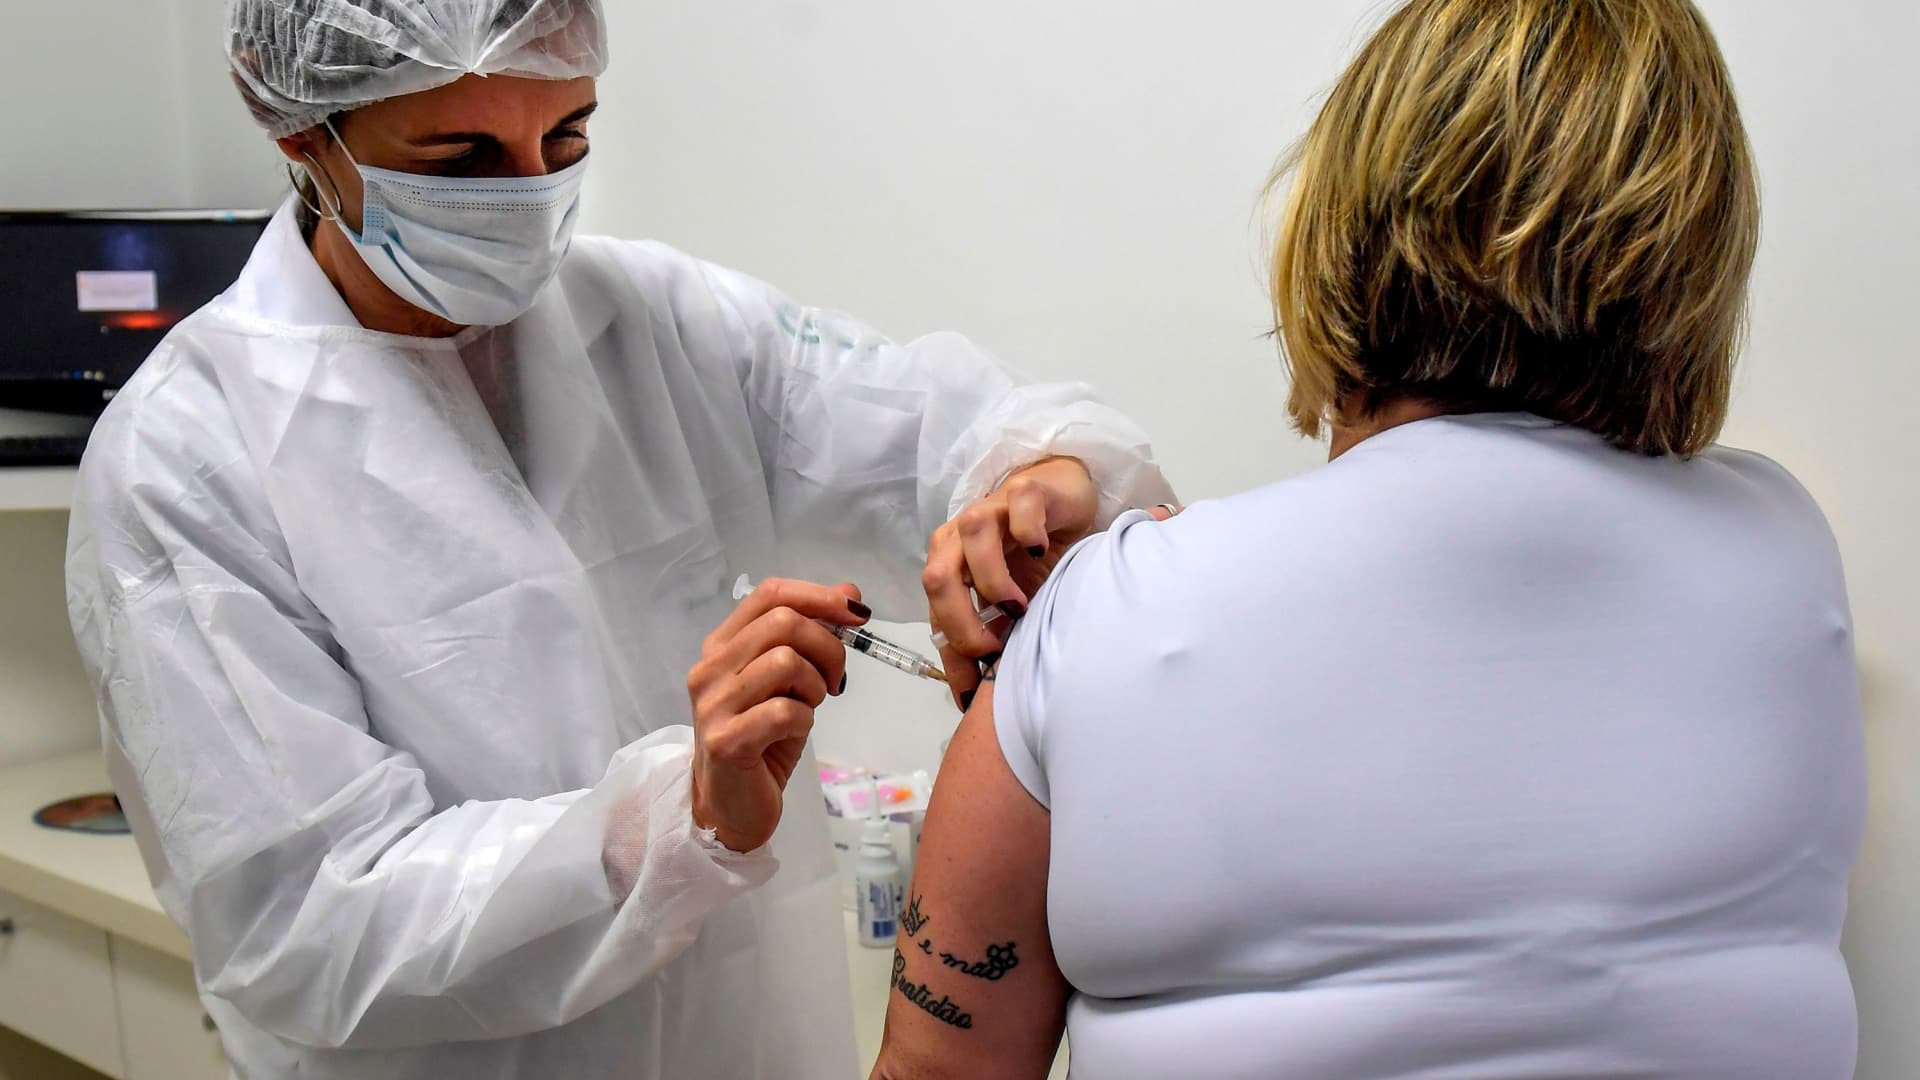 Brazilian pediatric doctor Monica Levi, one of the volunteers who received the COVID-19 vaccine, works at the Specialized Clinic in Infectious and Parasitic Diseases and Immunizations (CEDIPI), in Sao Paulo, Brazil, on July 24, 2020. The doctor is one of the 5,000 volunteers participating in Brazil of the phase 3 trials - the last before homologation - of the ChAdOx1 nCoV-19 vaccine, developed by the University of Oxford together with the British pharmaceutical company AstraZeneca.